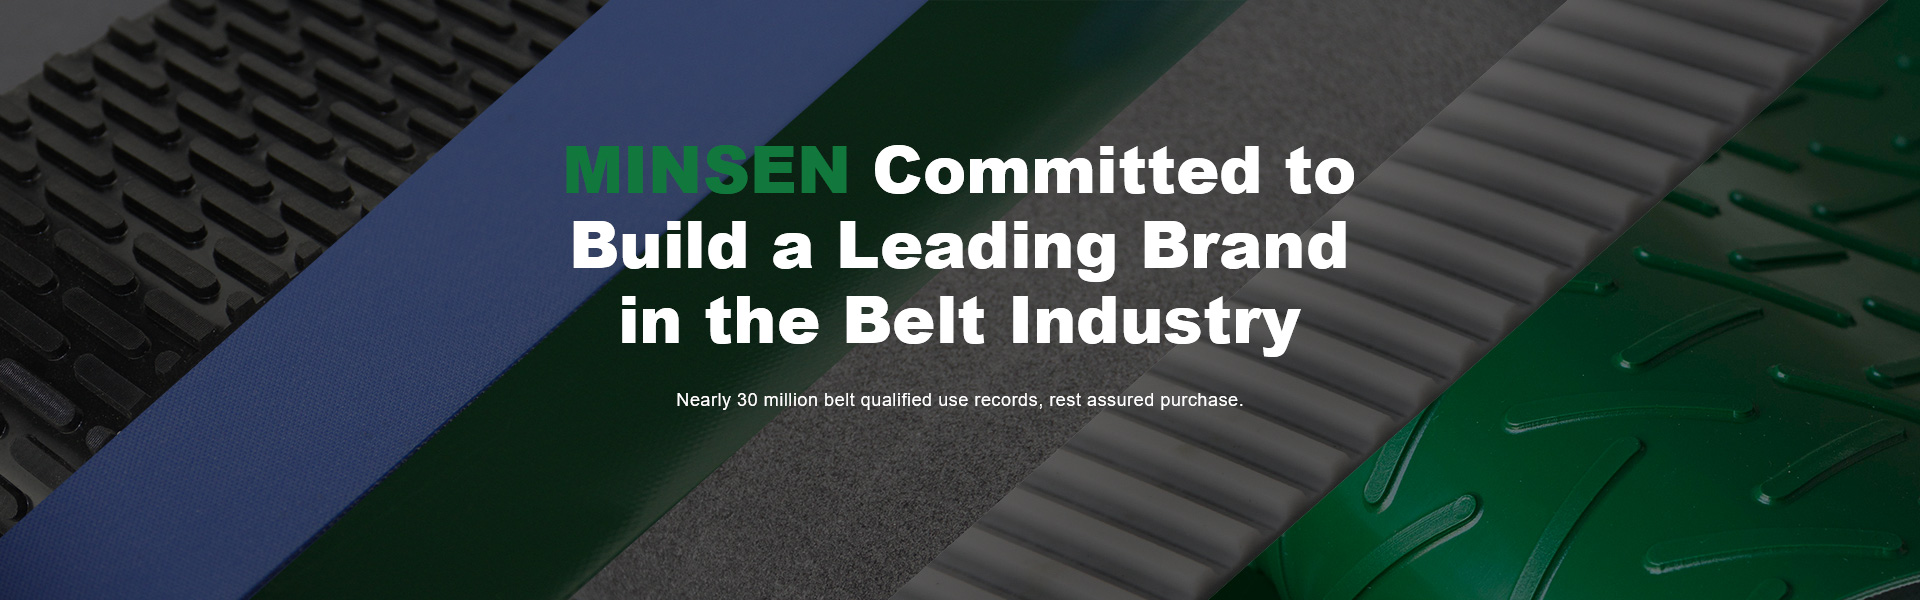 MINSEN Committed to Build a Leading Brand in the Belt Industry